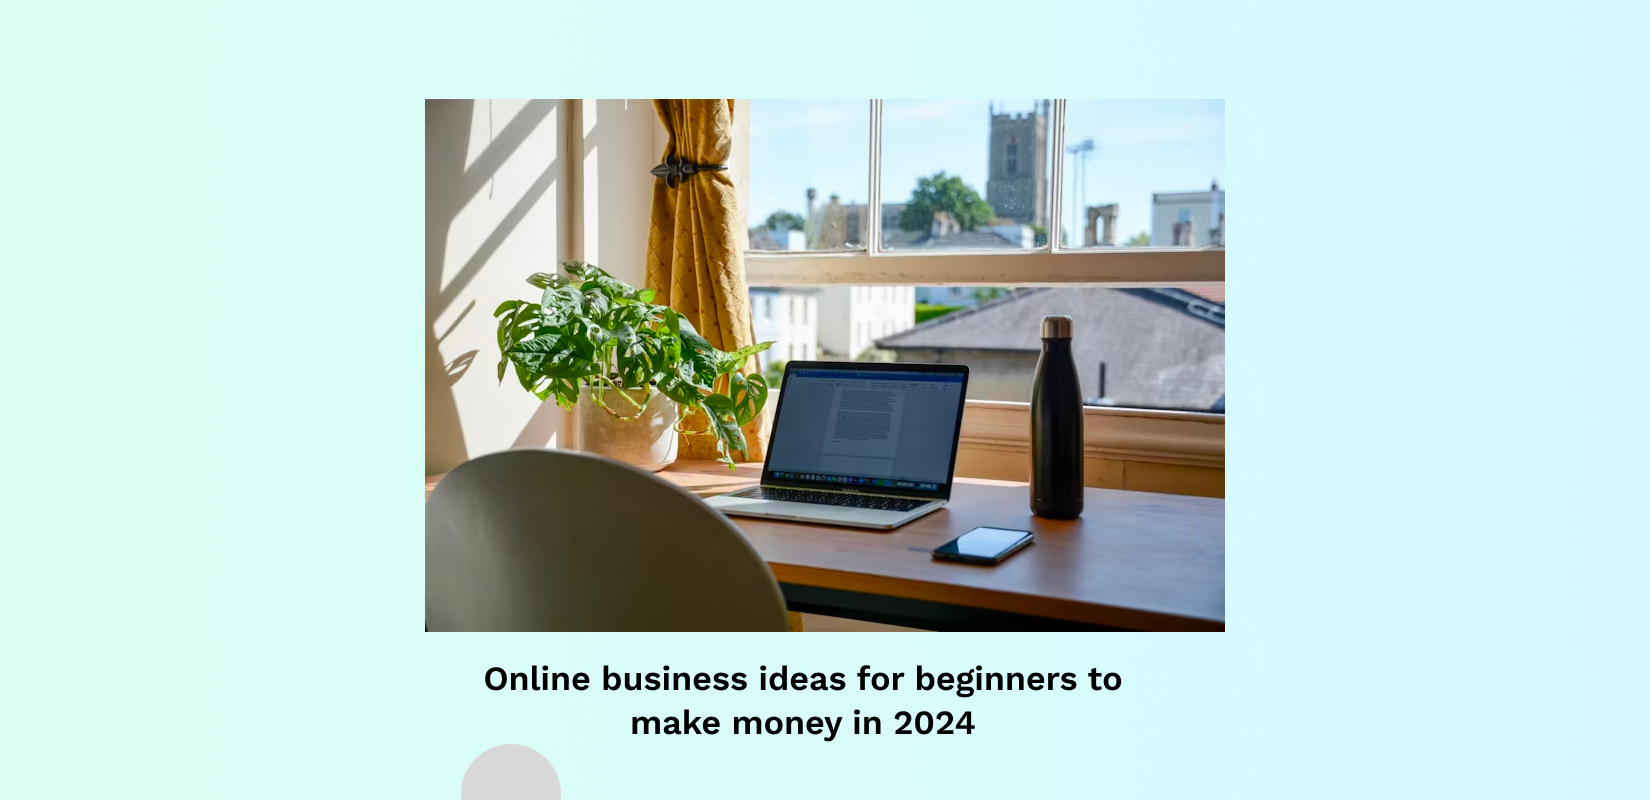 Make money with these online business ideas for beginners in 2024